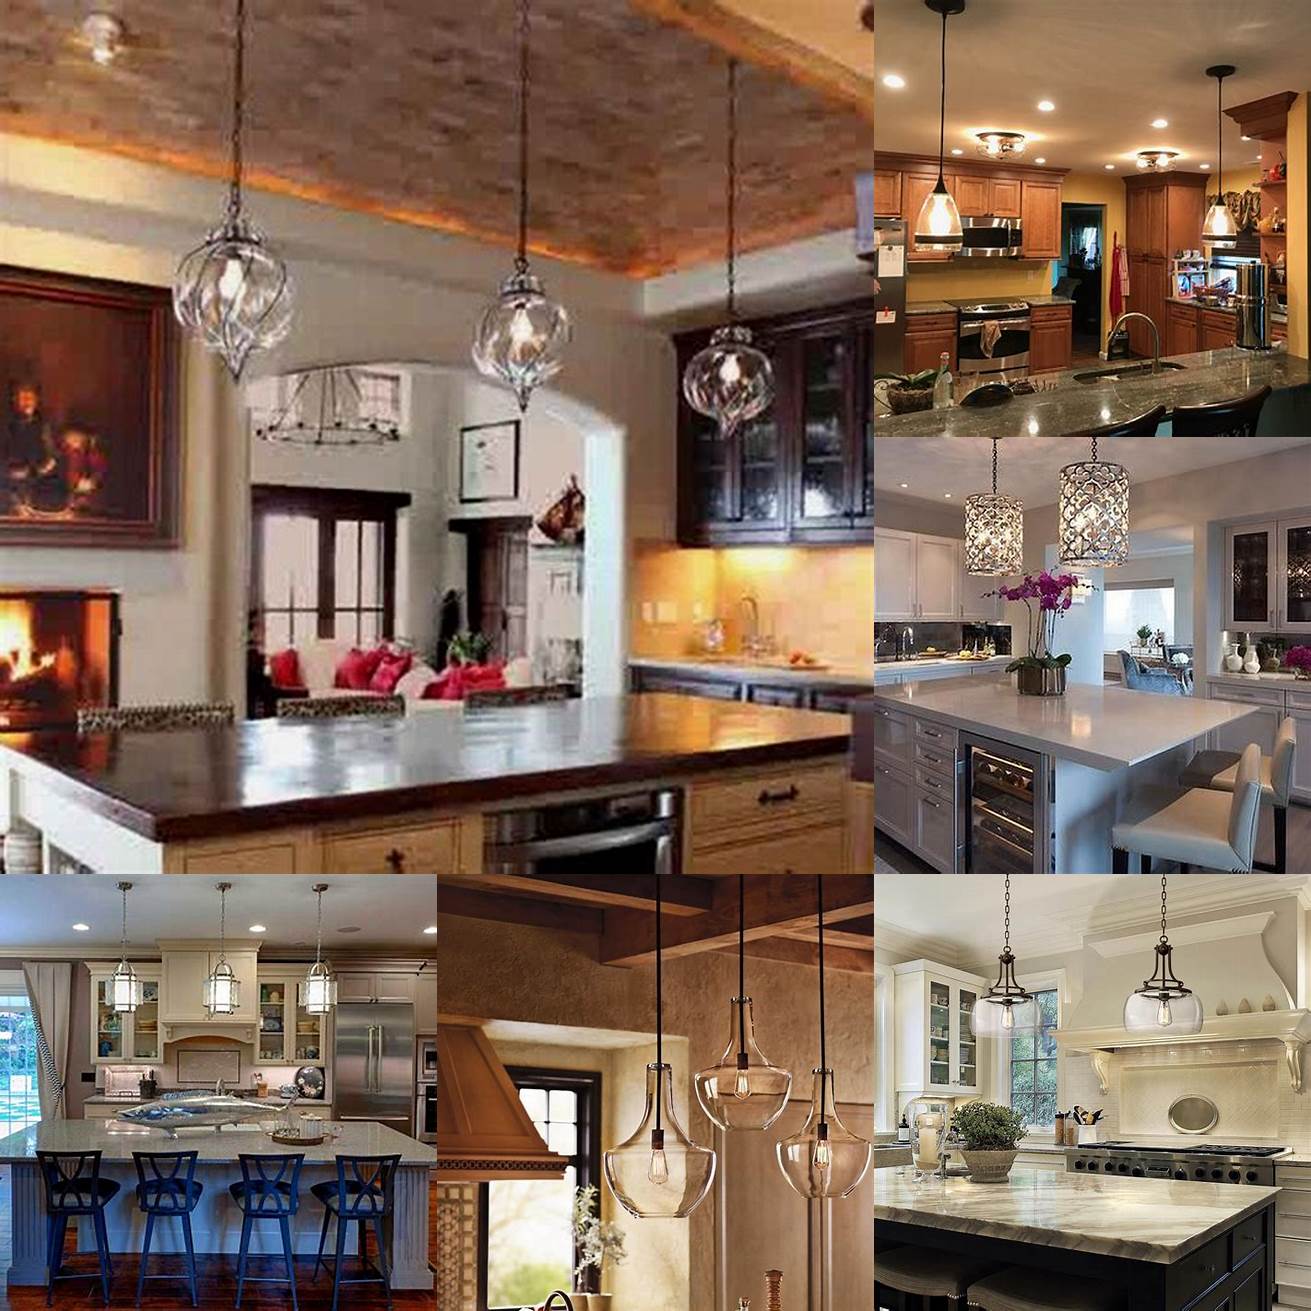 Choose a light fixture that complements the style of your kitchen